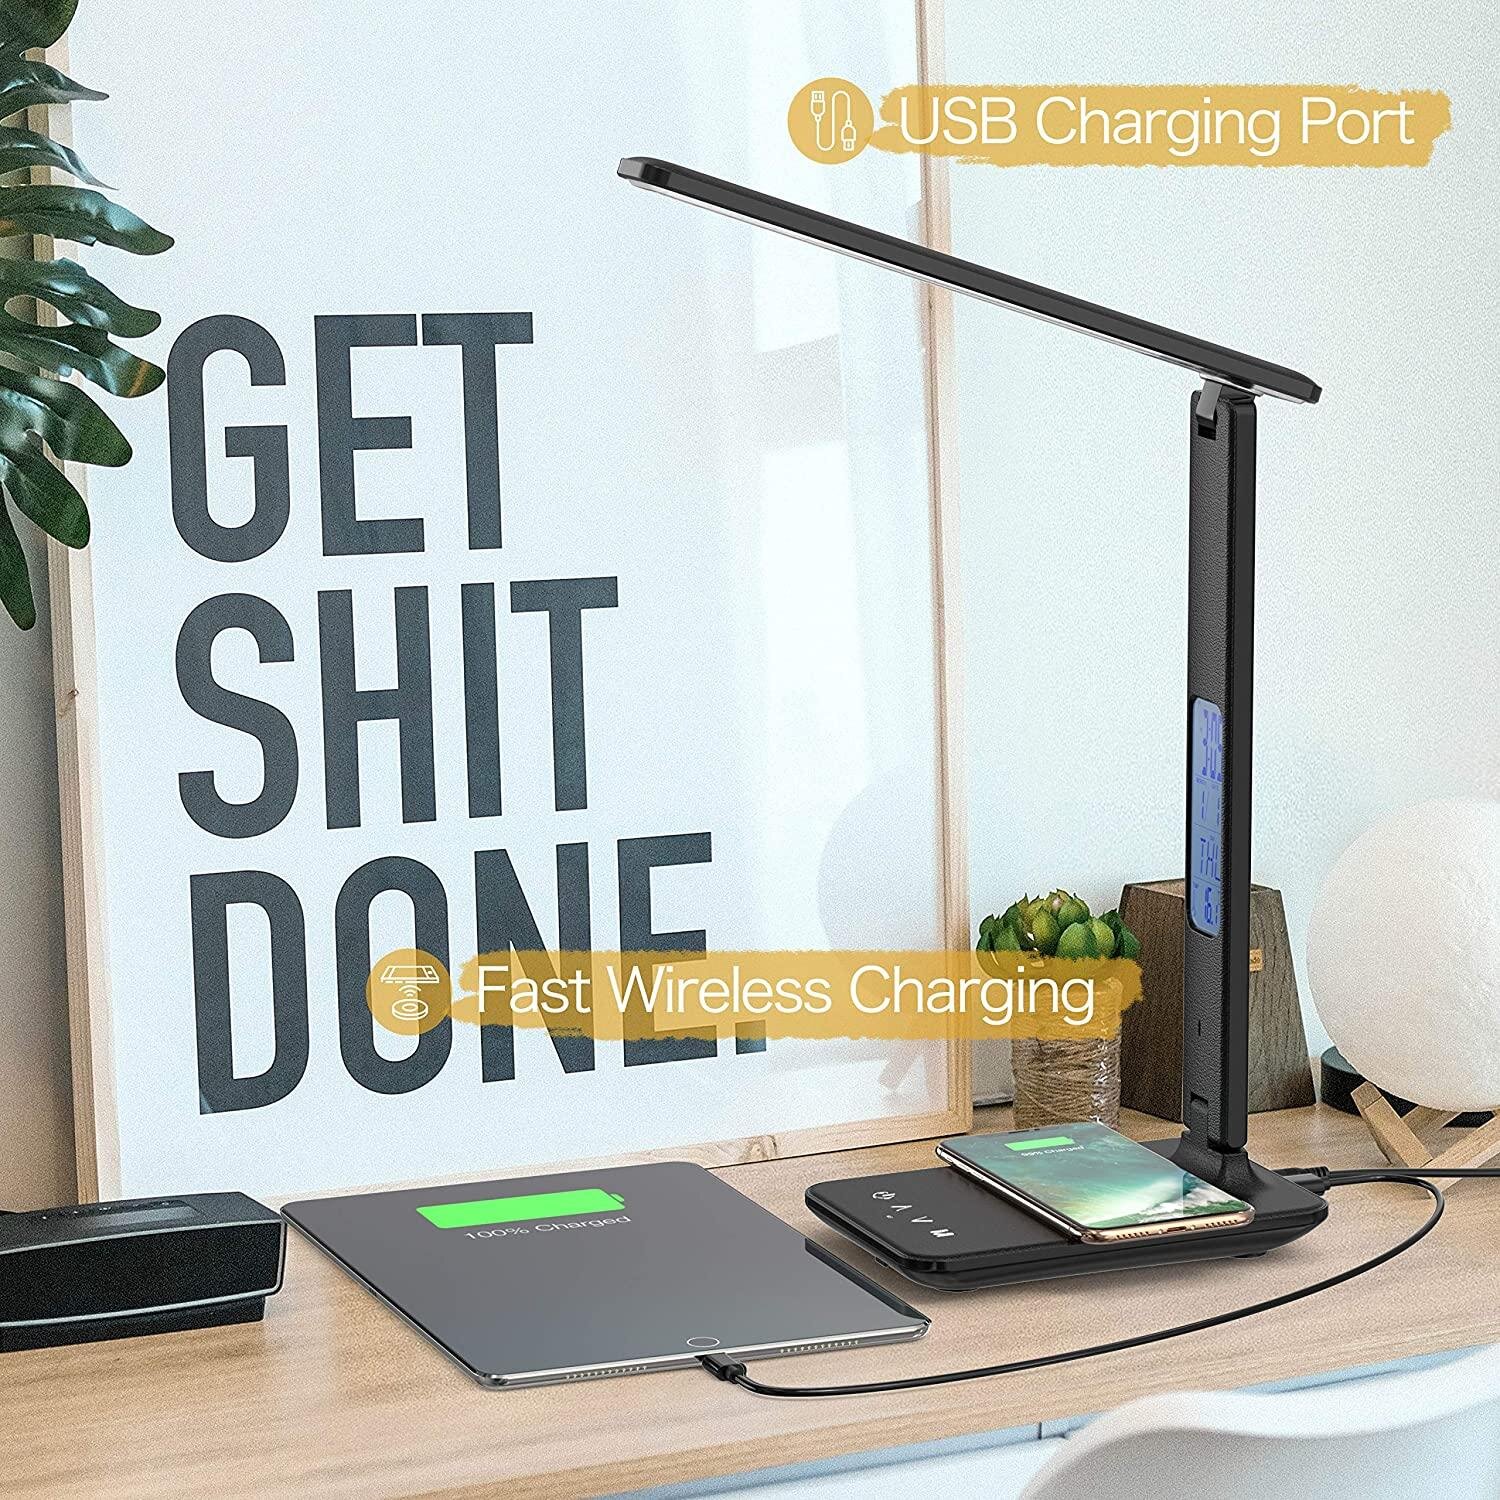 LED flexo intensity LED light with 3 brightness modes and rechargeable Ideal for study and/or reading. LED touch lamp with clamp for reading and flexible neck 360º LED desk lamp